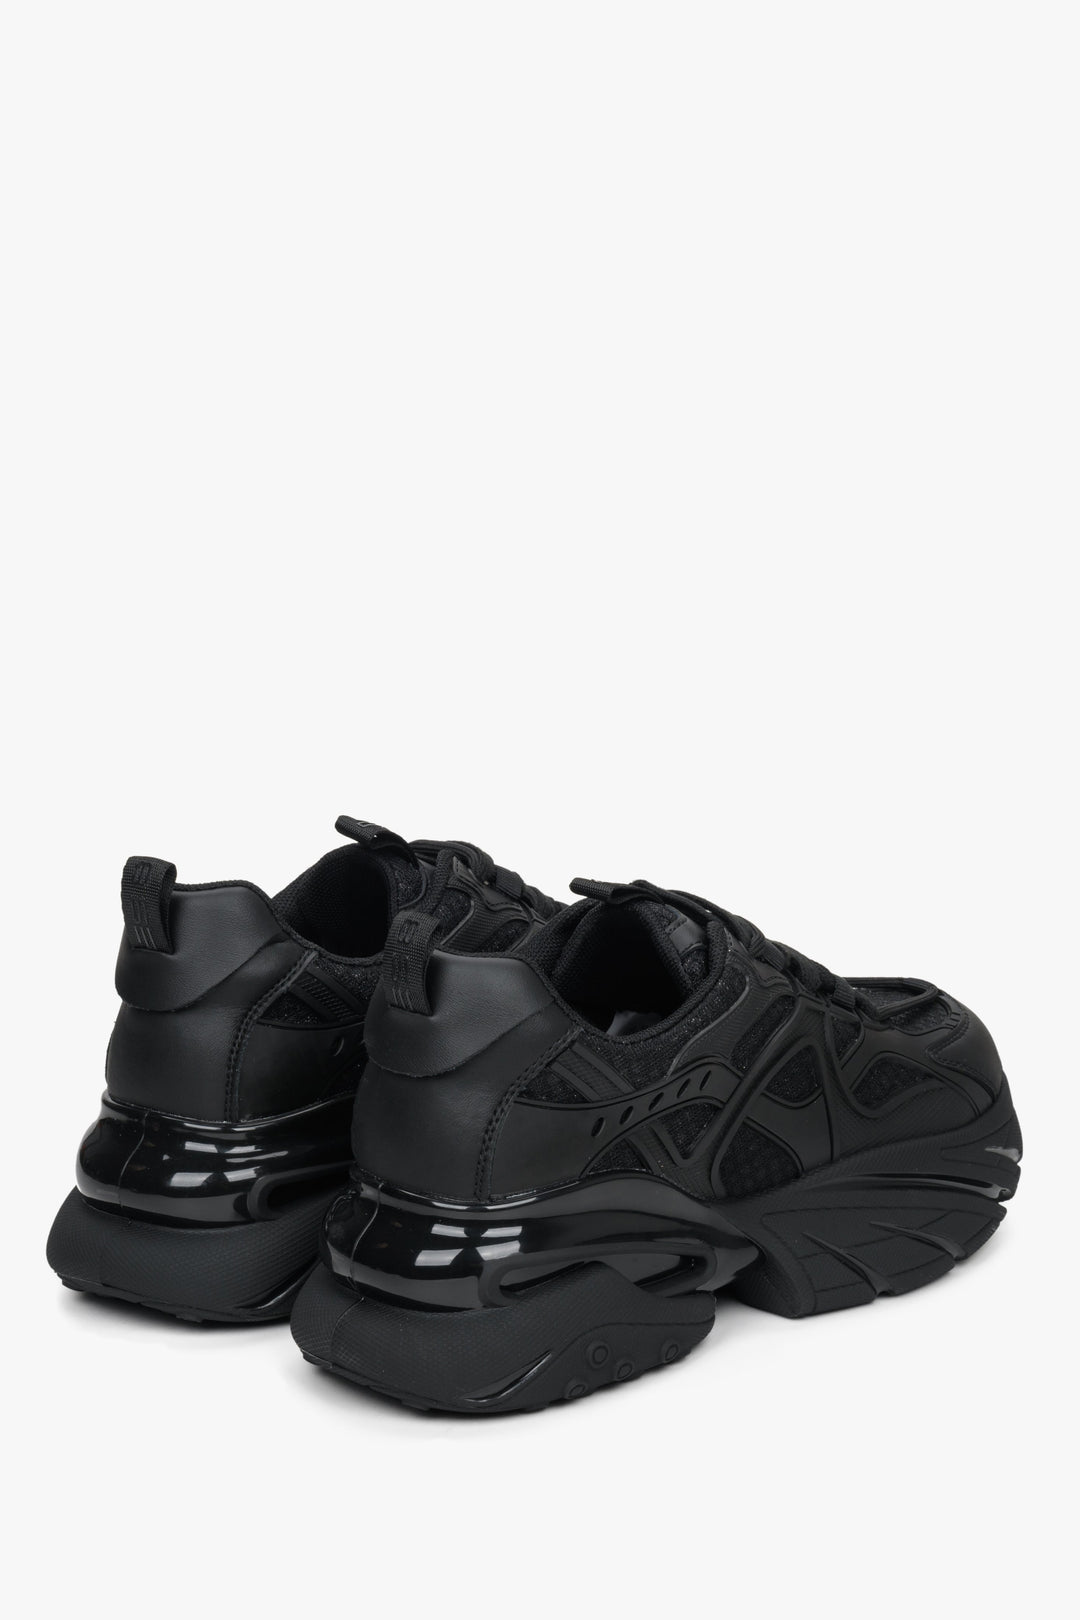 Women's black sneakers with a chunky sole.